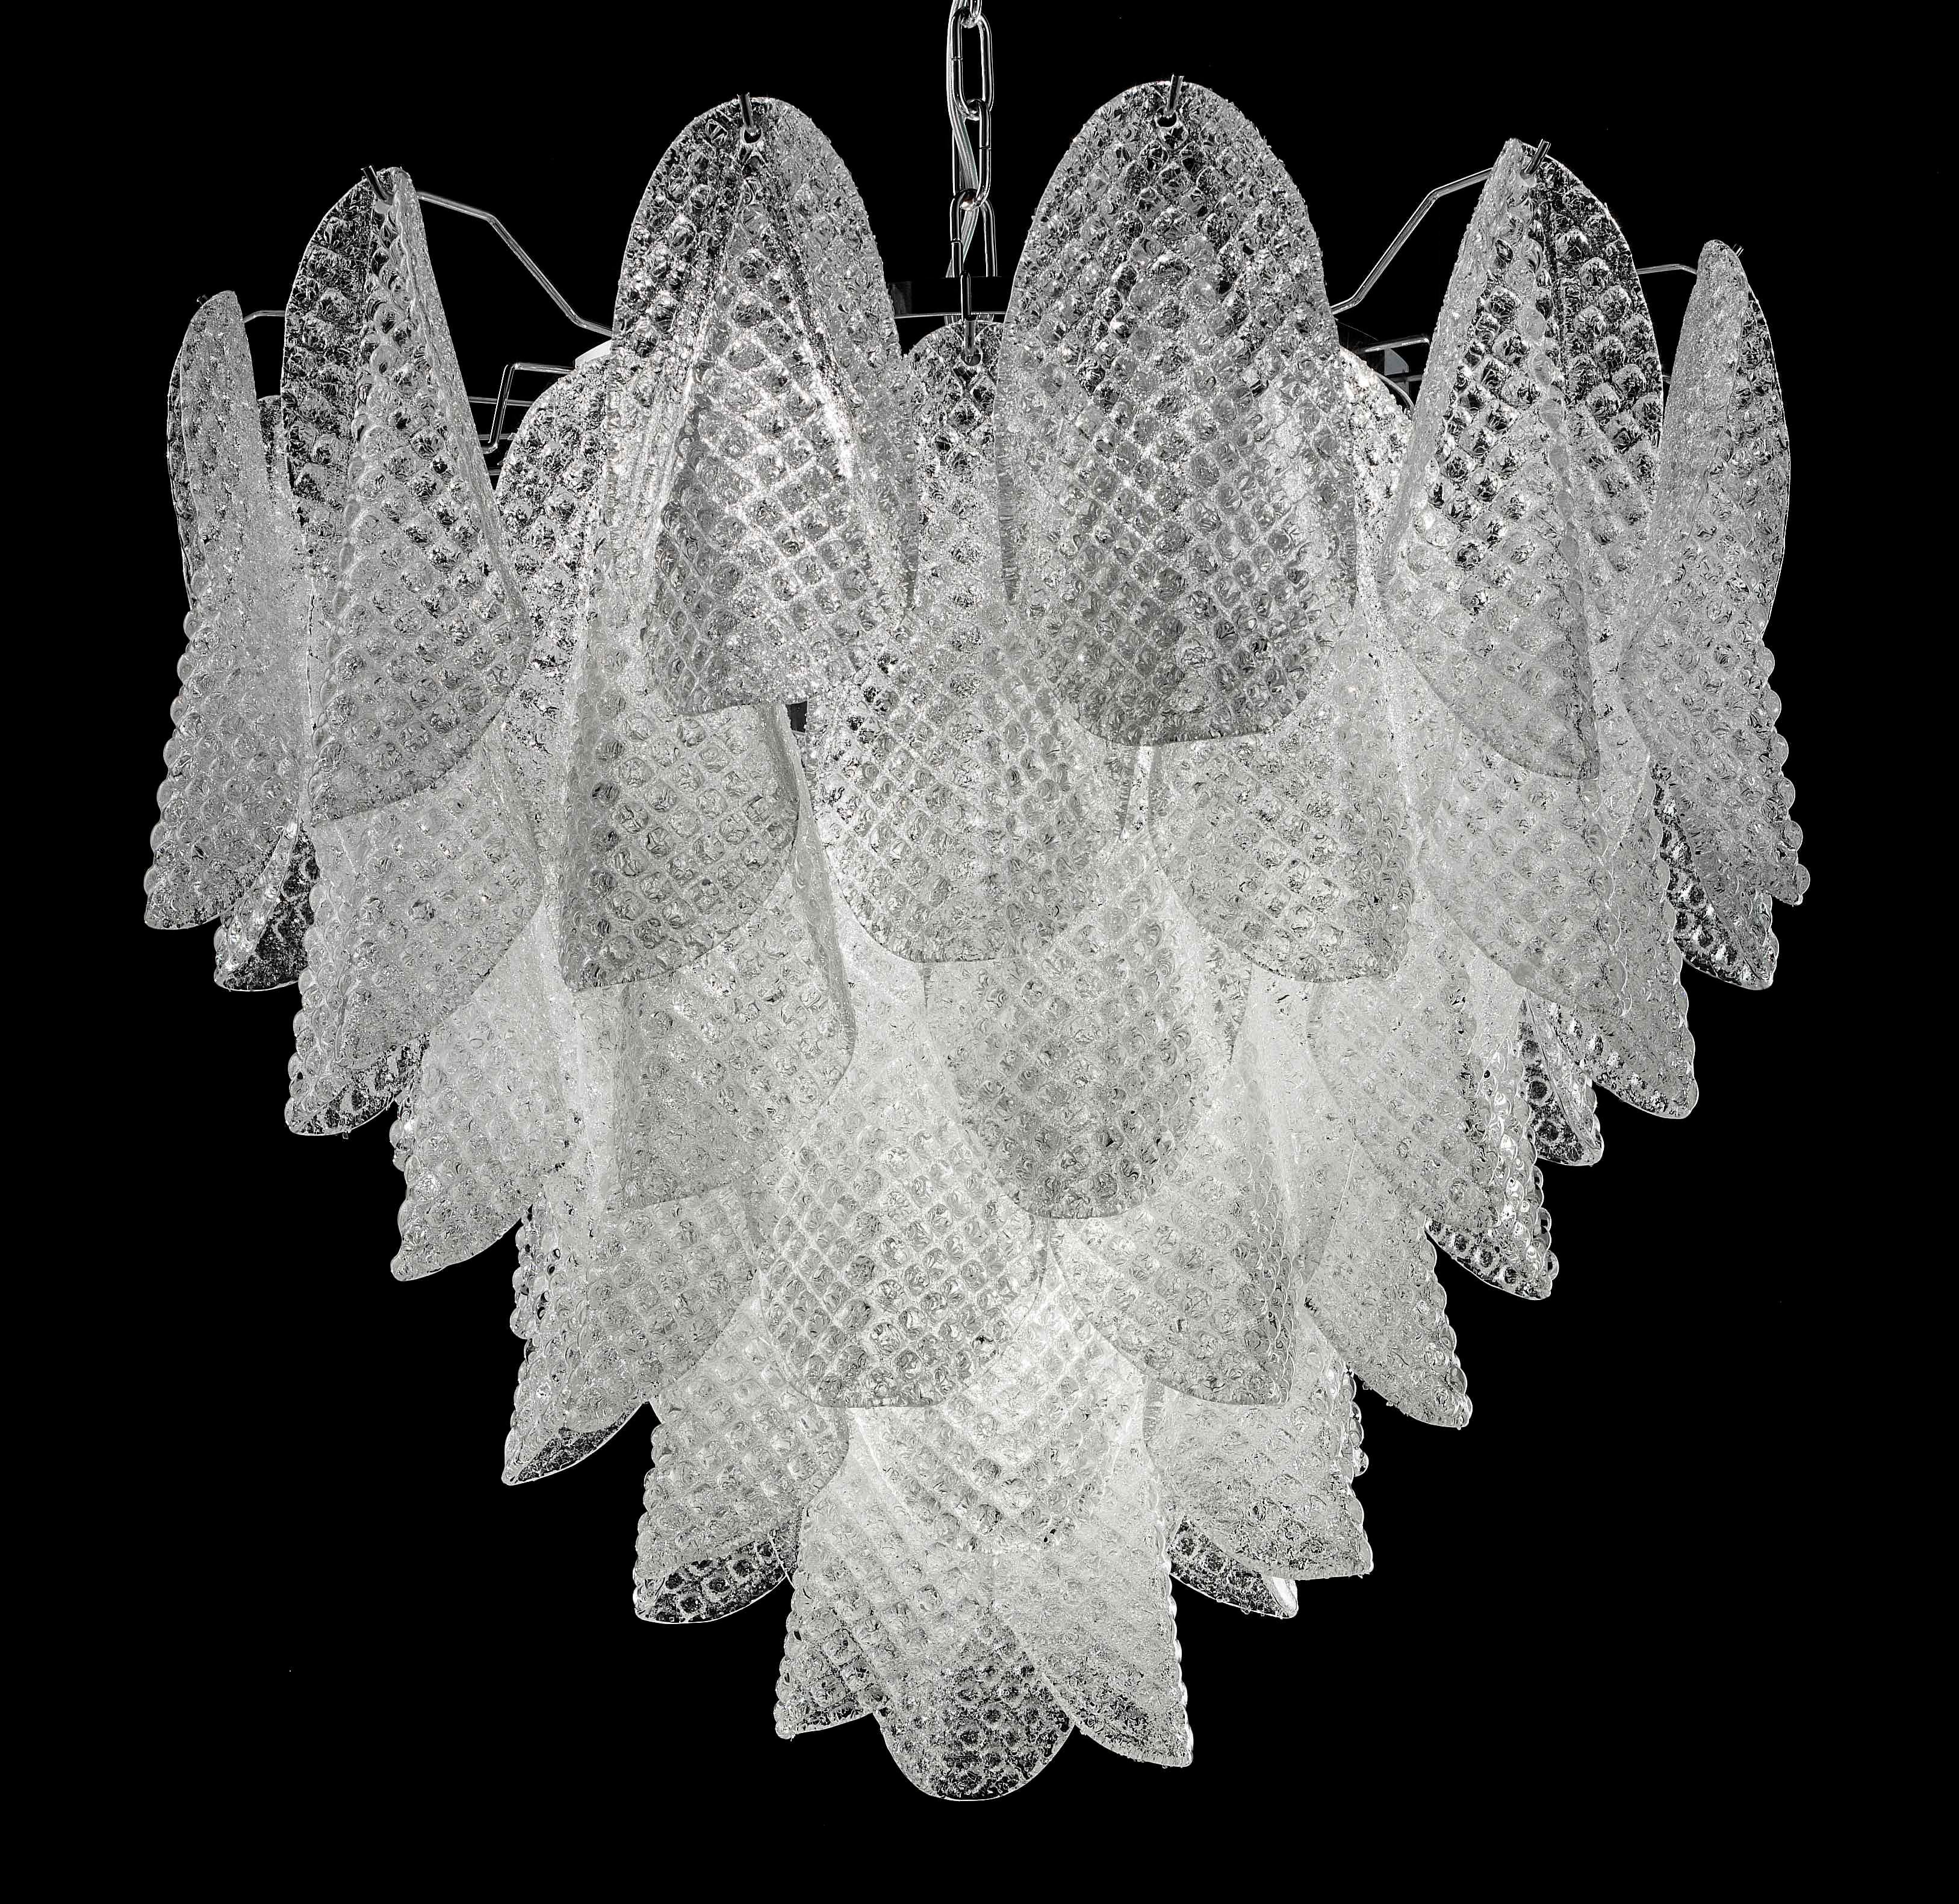 Italian chandelier shown with clear textured Murano glass petals hand blown in Graniglia technique to produce granular textured effect, mounted on chrome finish metal frame / Designed by Fabio Bergomi for Fabio Ltd, inspired by Vistosi / Made in